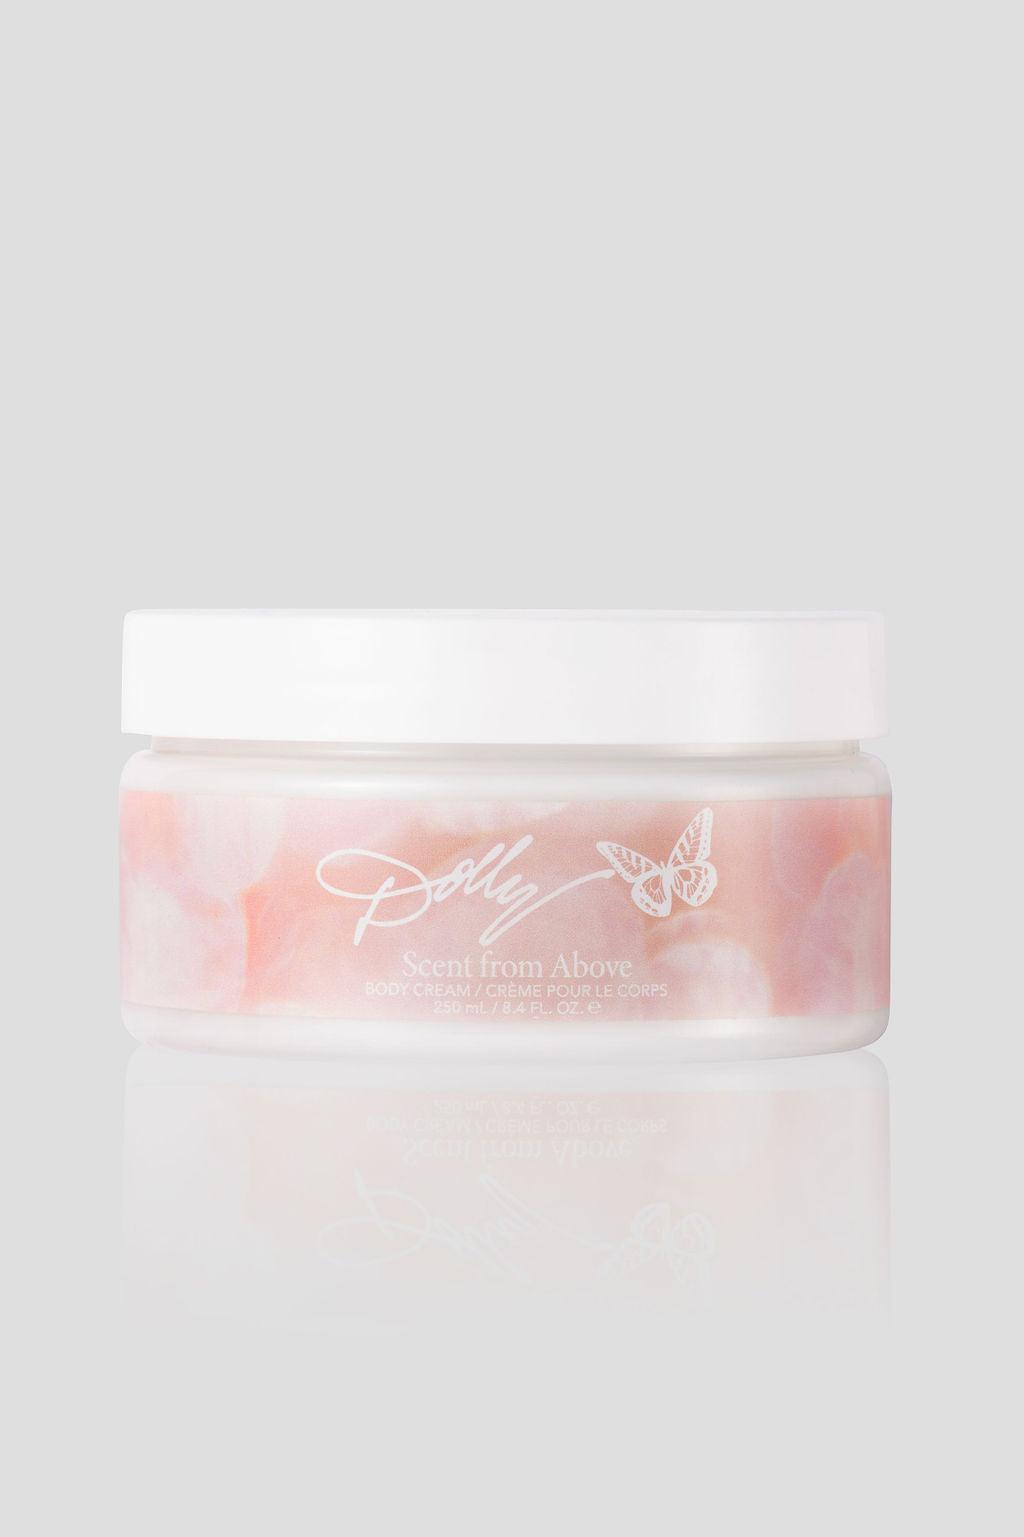 DOLLY: SCENT FROM ABOVE BODY CREAM - SCENT BEAUTY